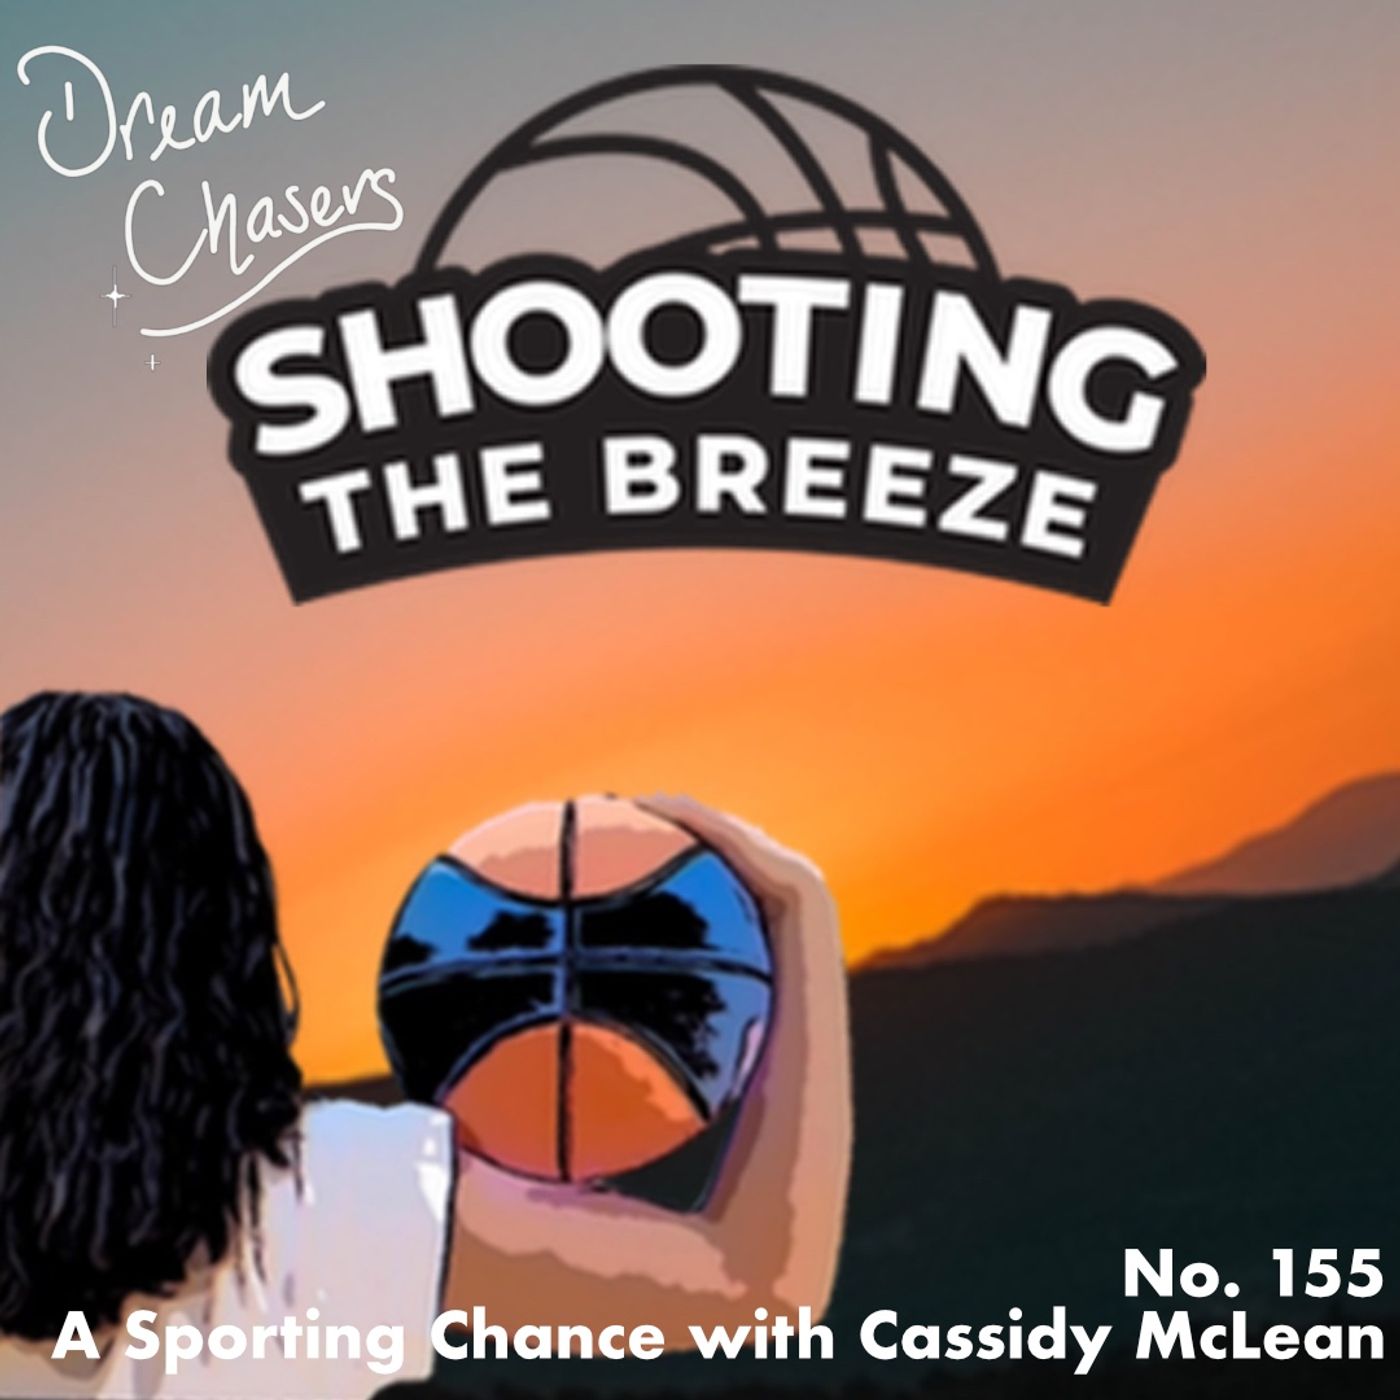 No. 155: A Sporting Chance with Cassidy McLean